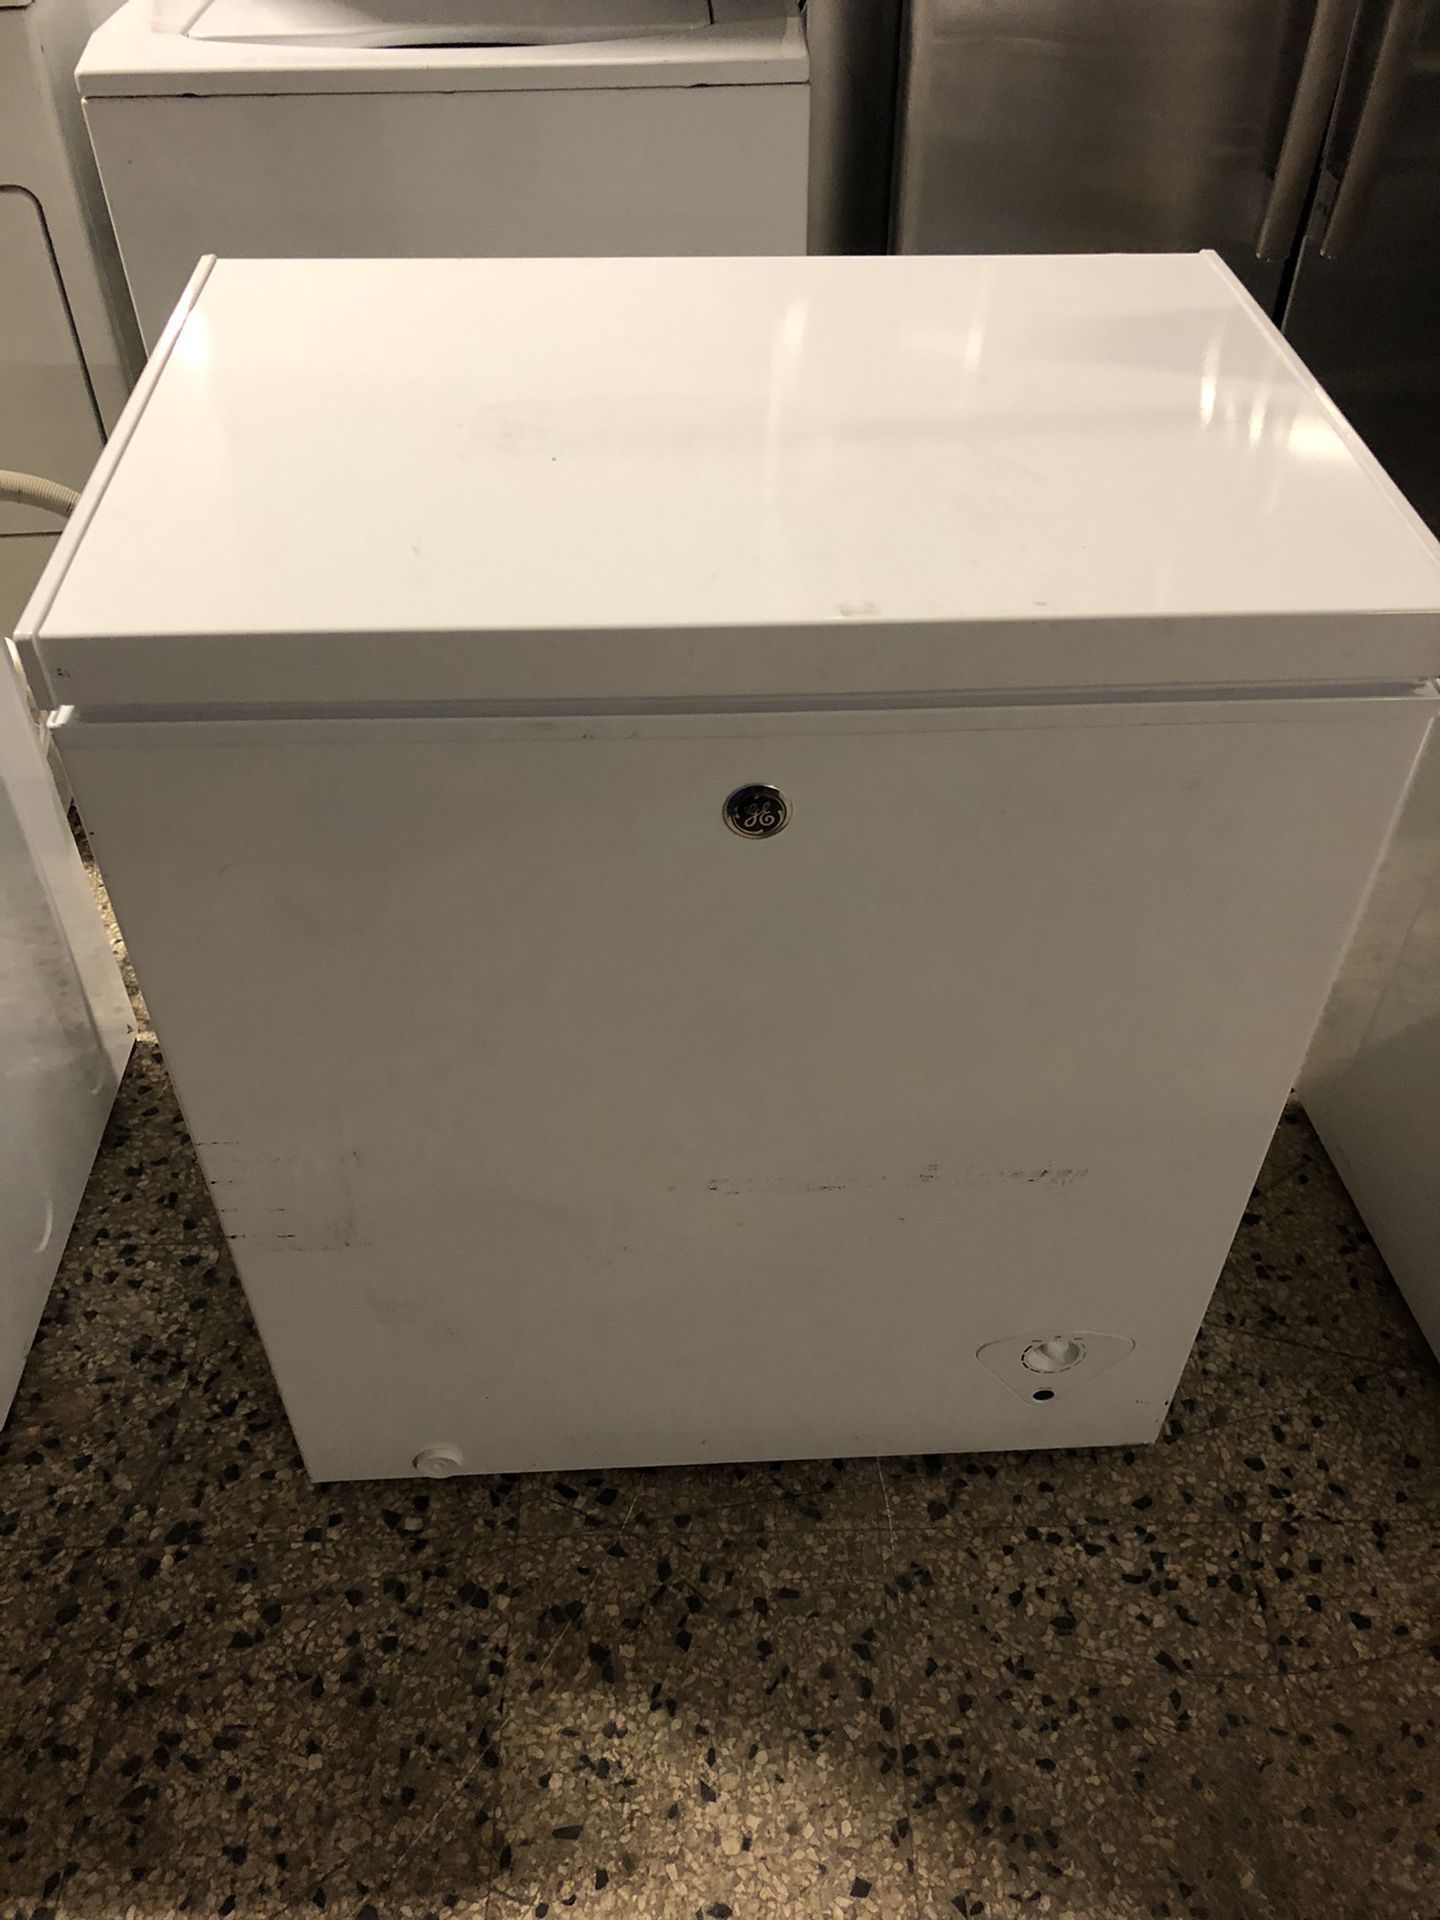 GE CHEST FREEZER 5.0 cubic with warranty